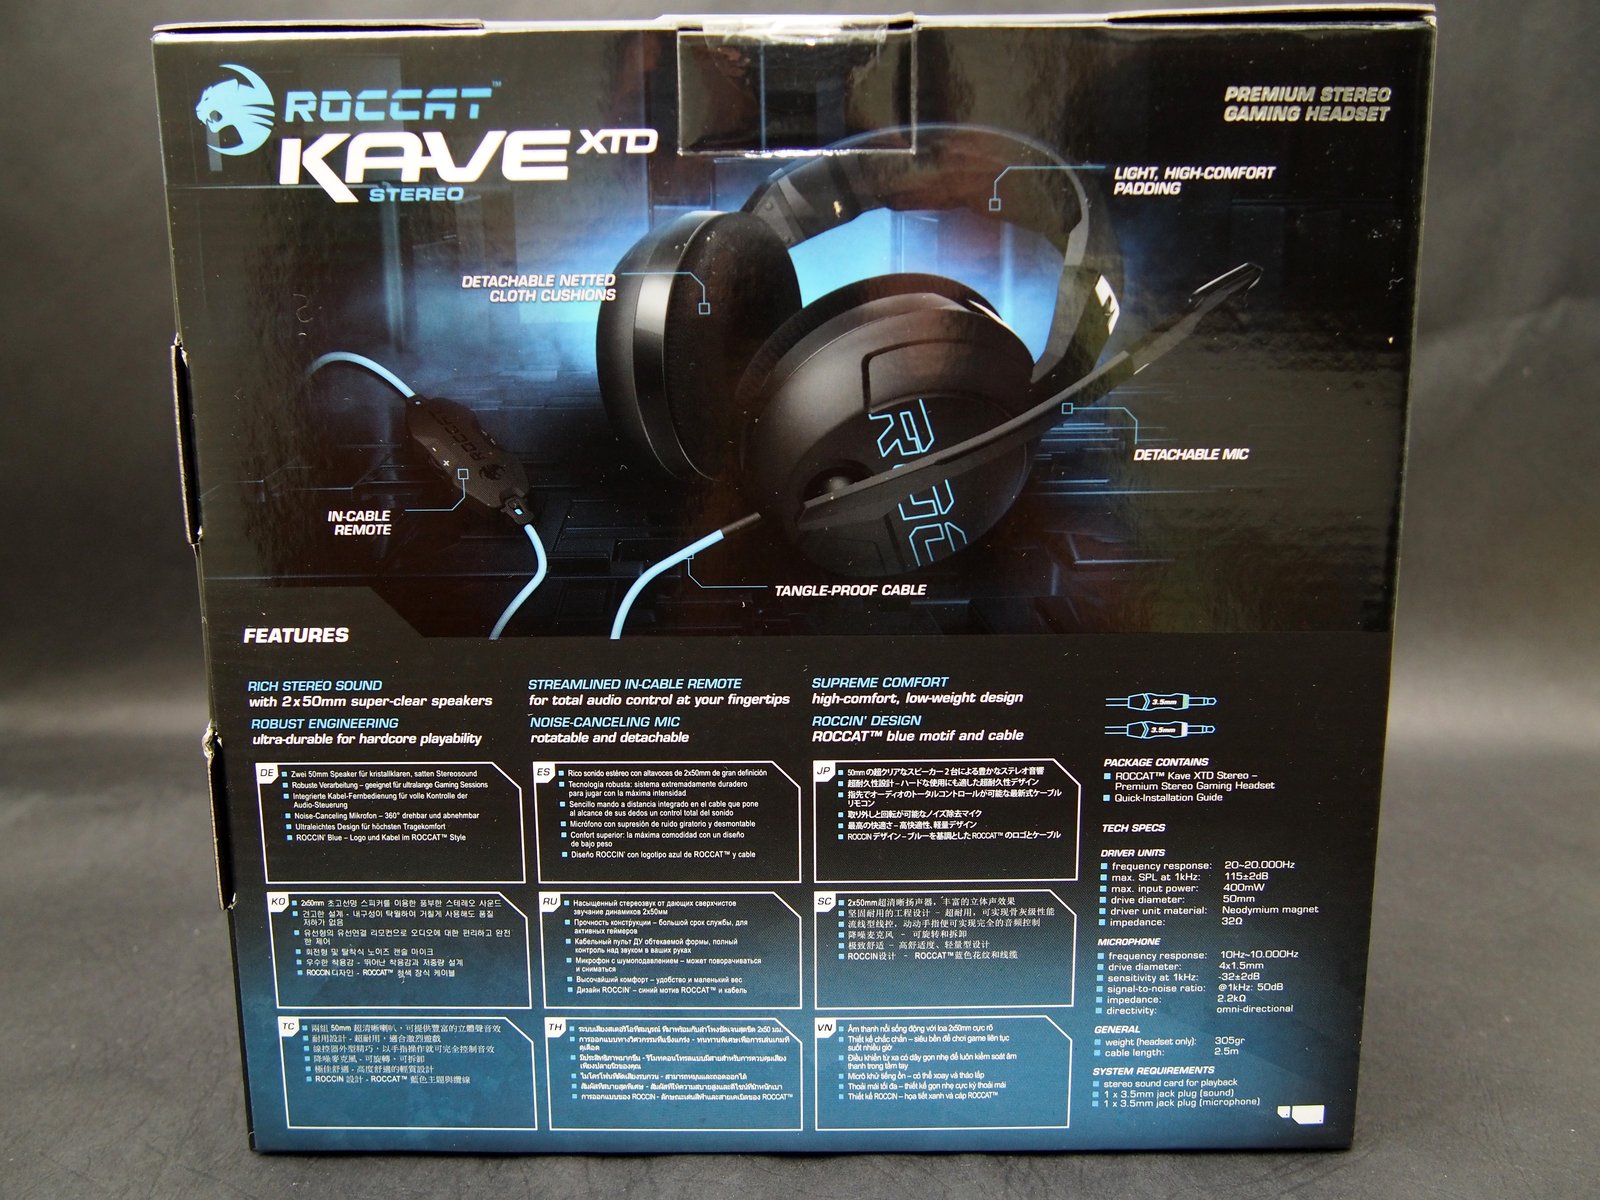 [XF] 海軍風格塗裝新裝上市 ROCCAT Kave XTD Stereo Military